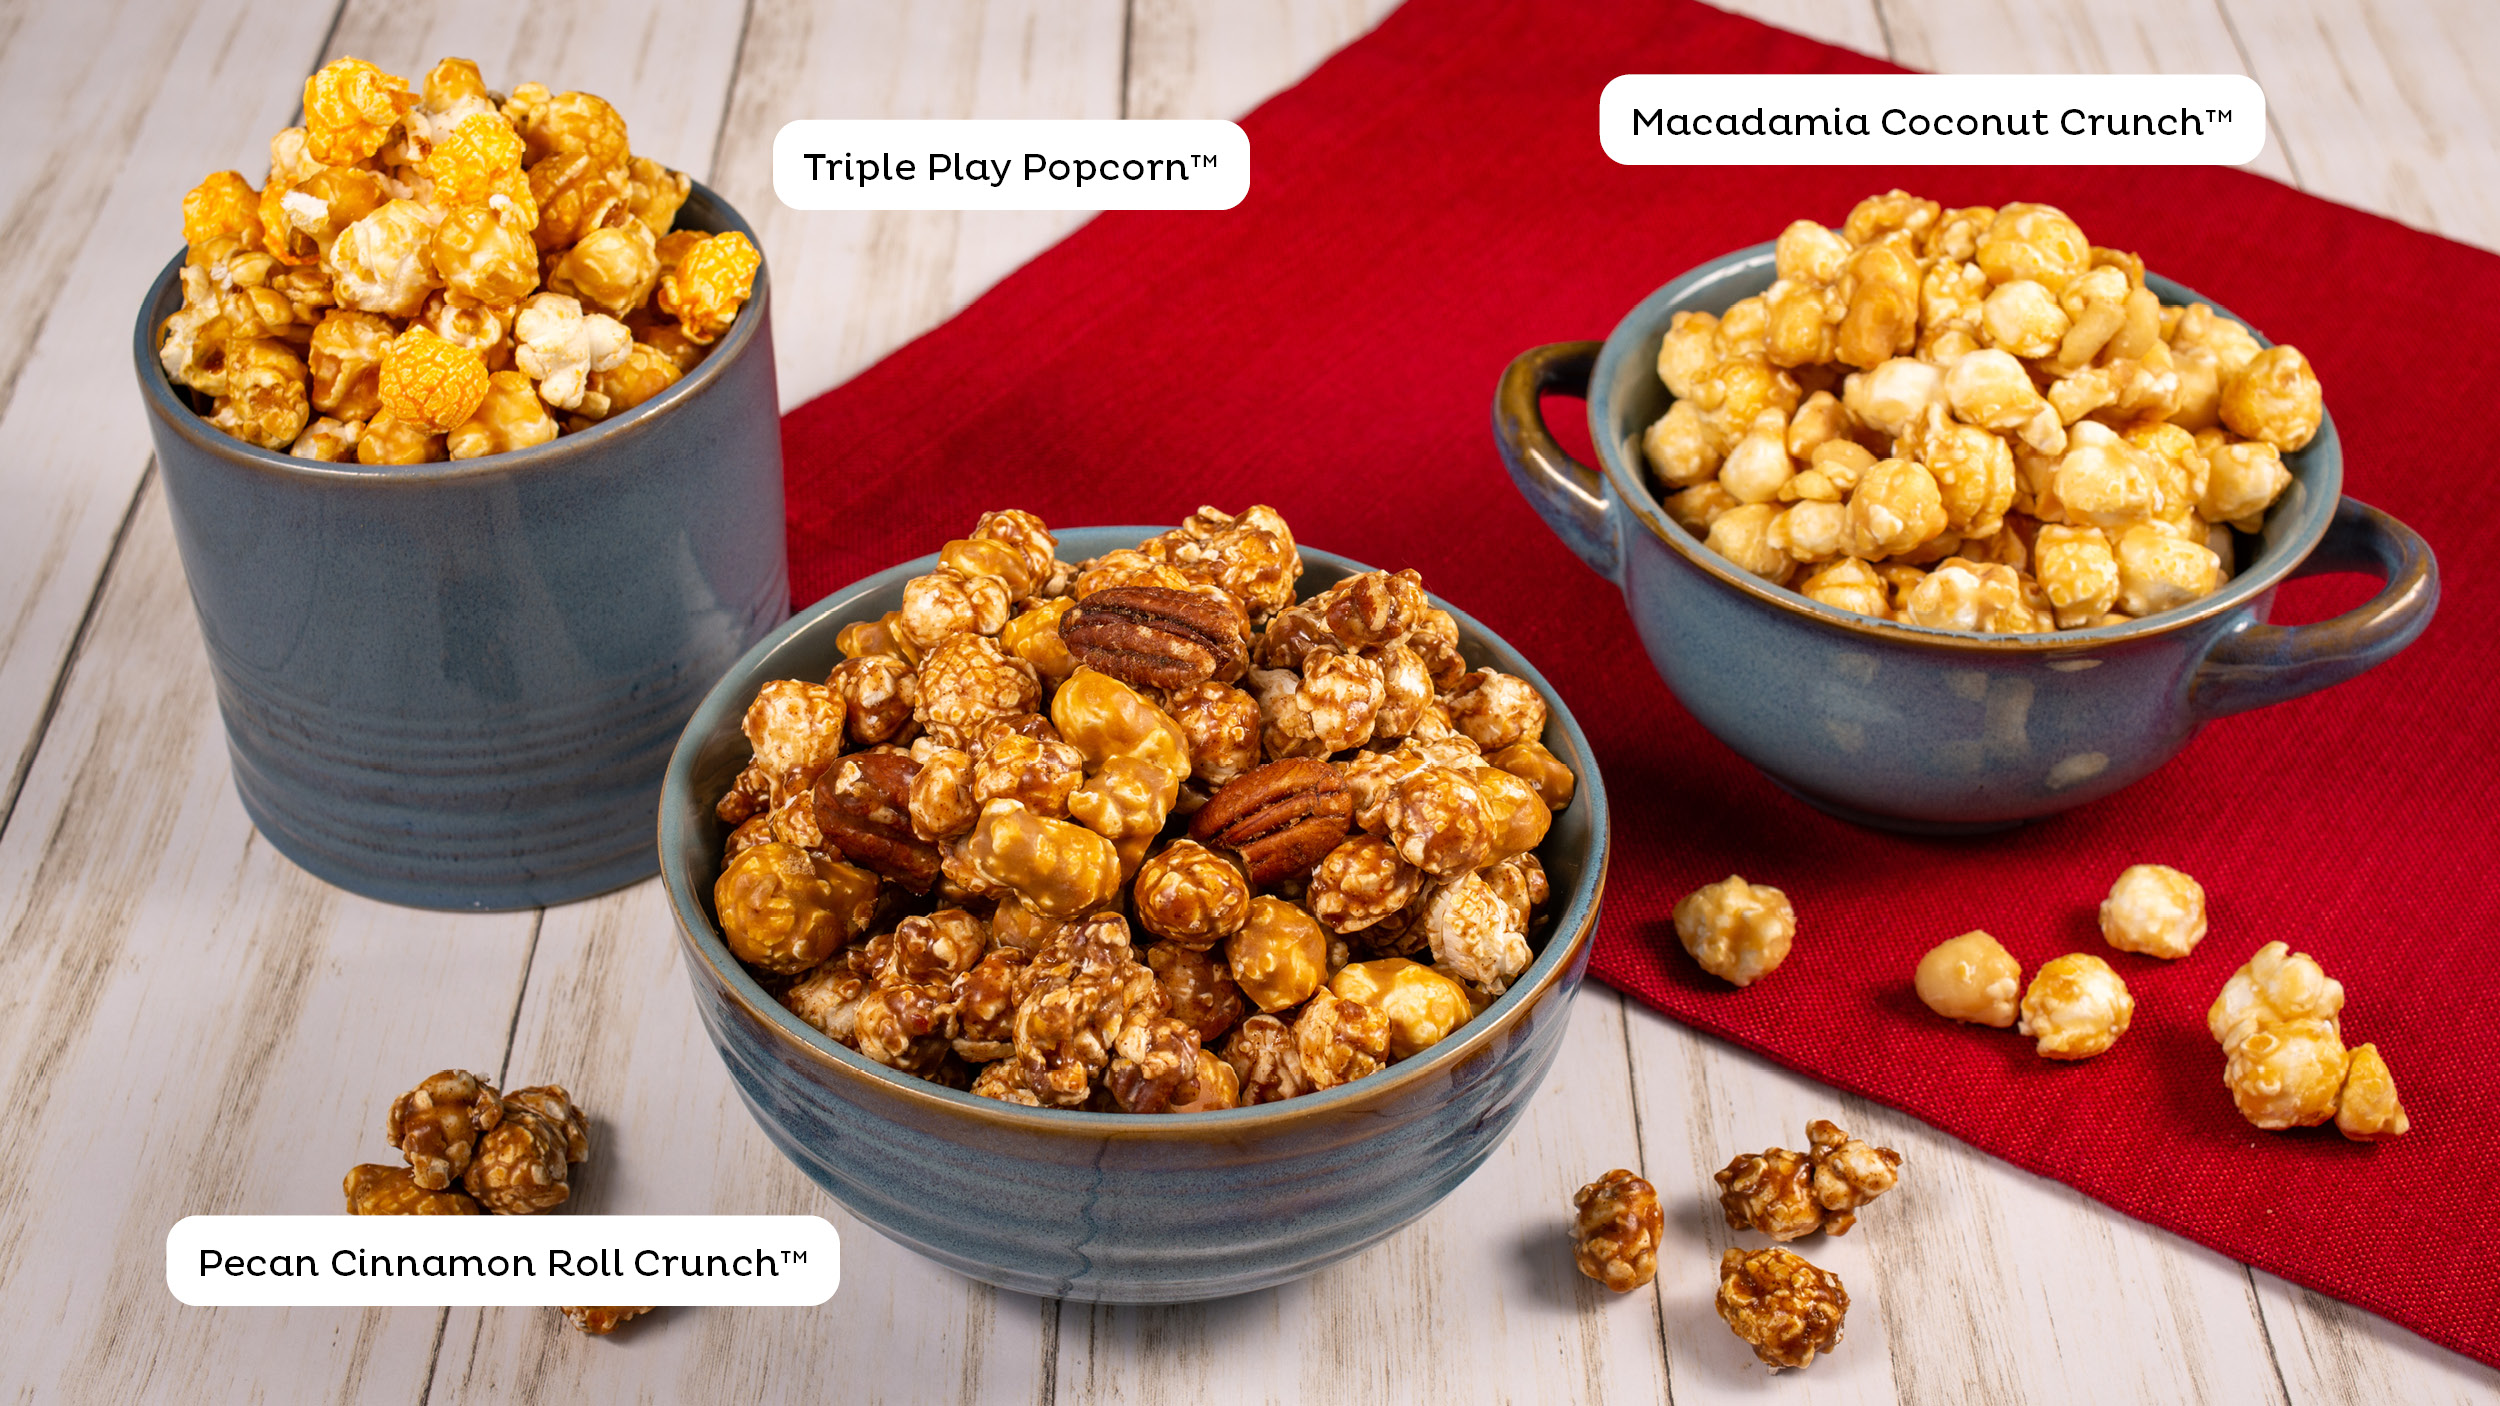 Our gourmet popcorn flavors displayed on a table